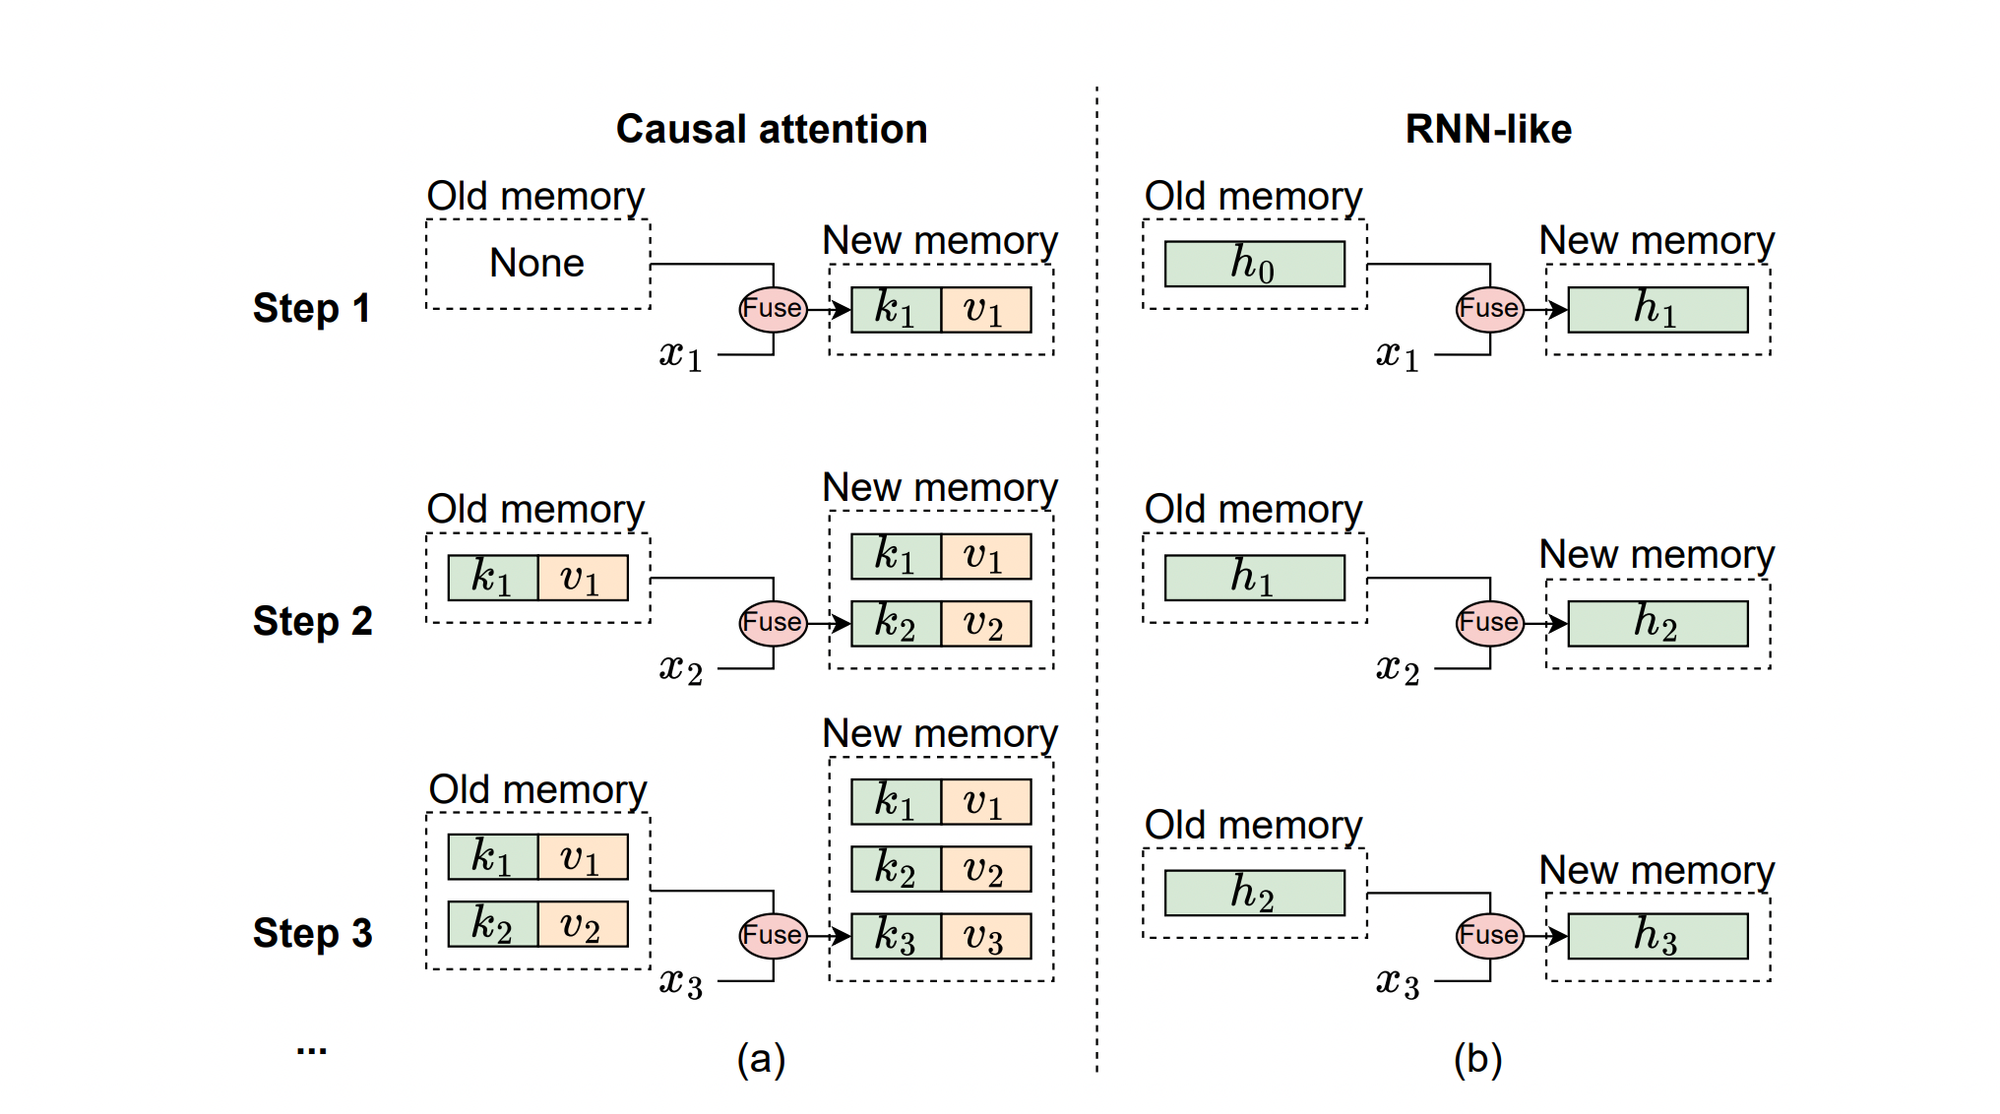 RNN-like models and causal attention